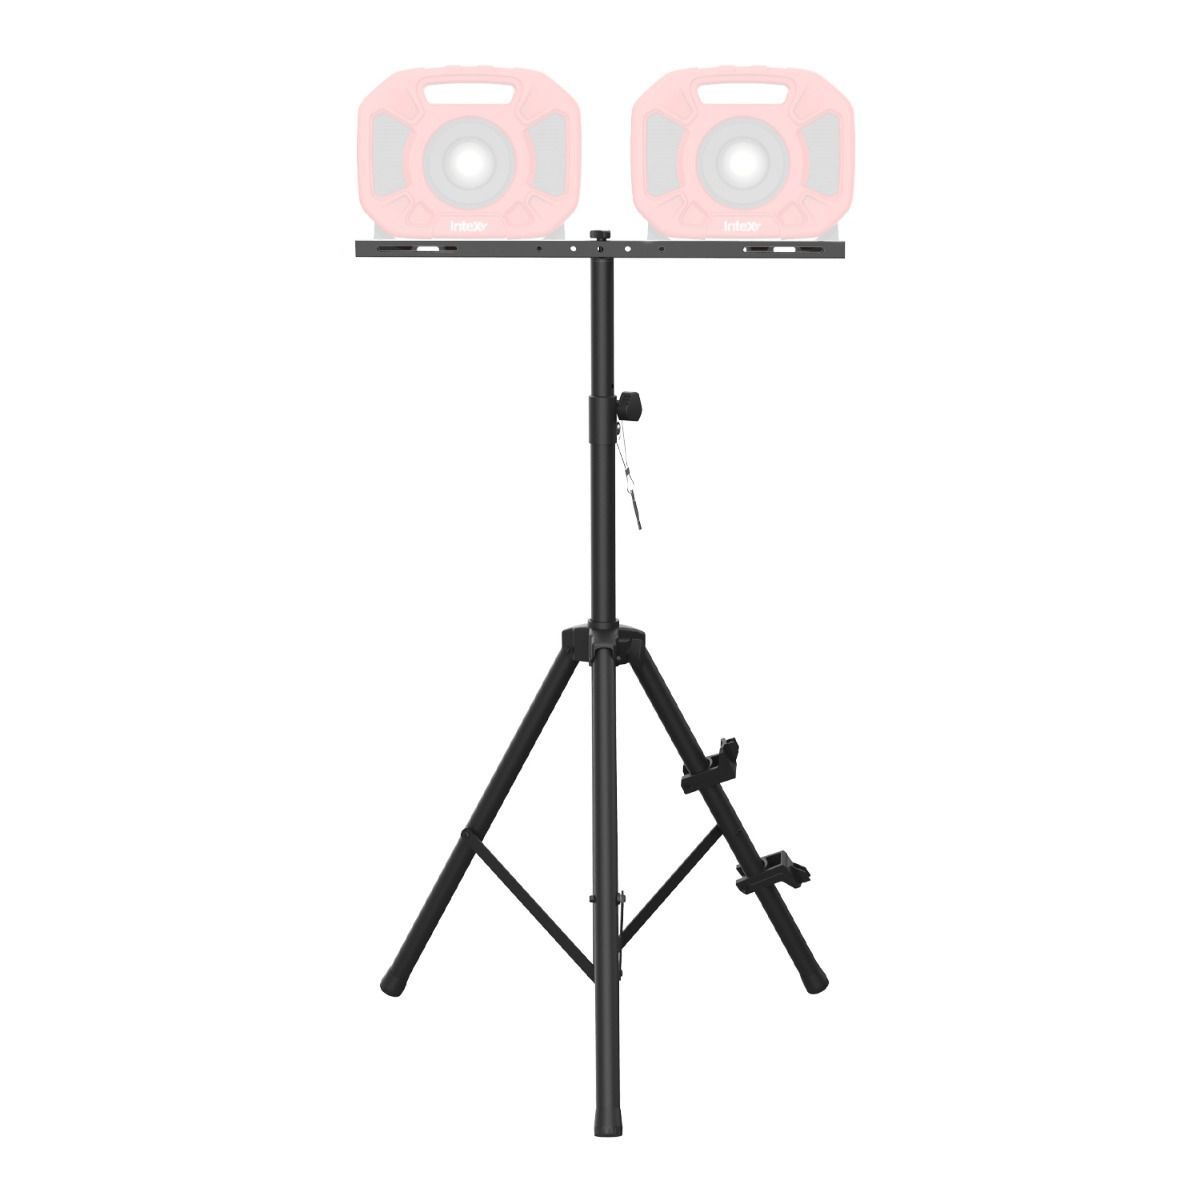 Telescopic LED Work Light Tripod Stand 1100 - 2100mm (43 - 83in)
